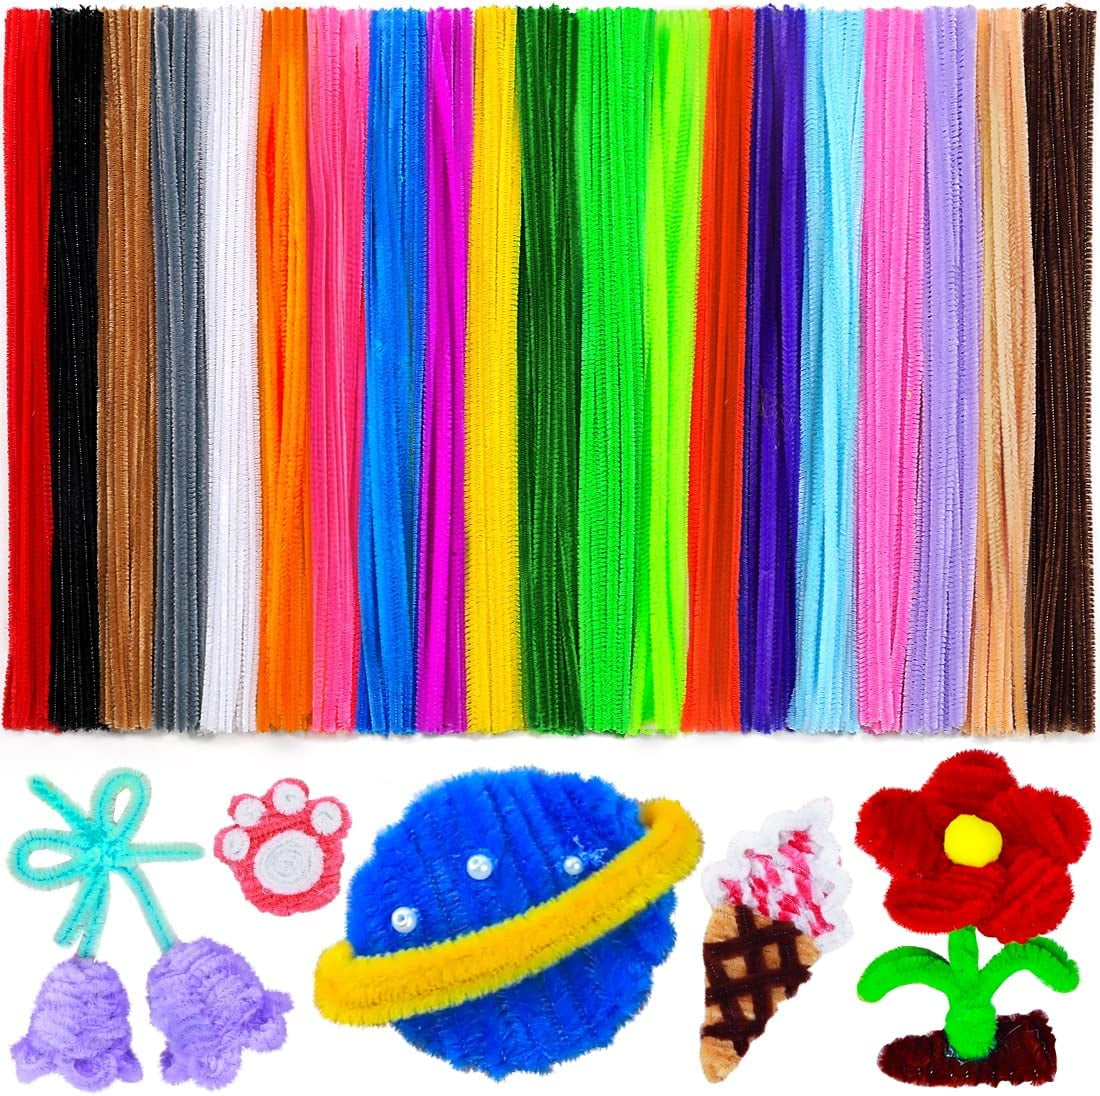 200Pcs Pipe Cleaners Colorful Twisting Sticks for DIY Crafts